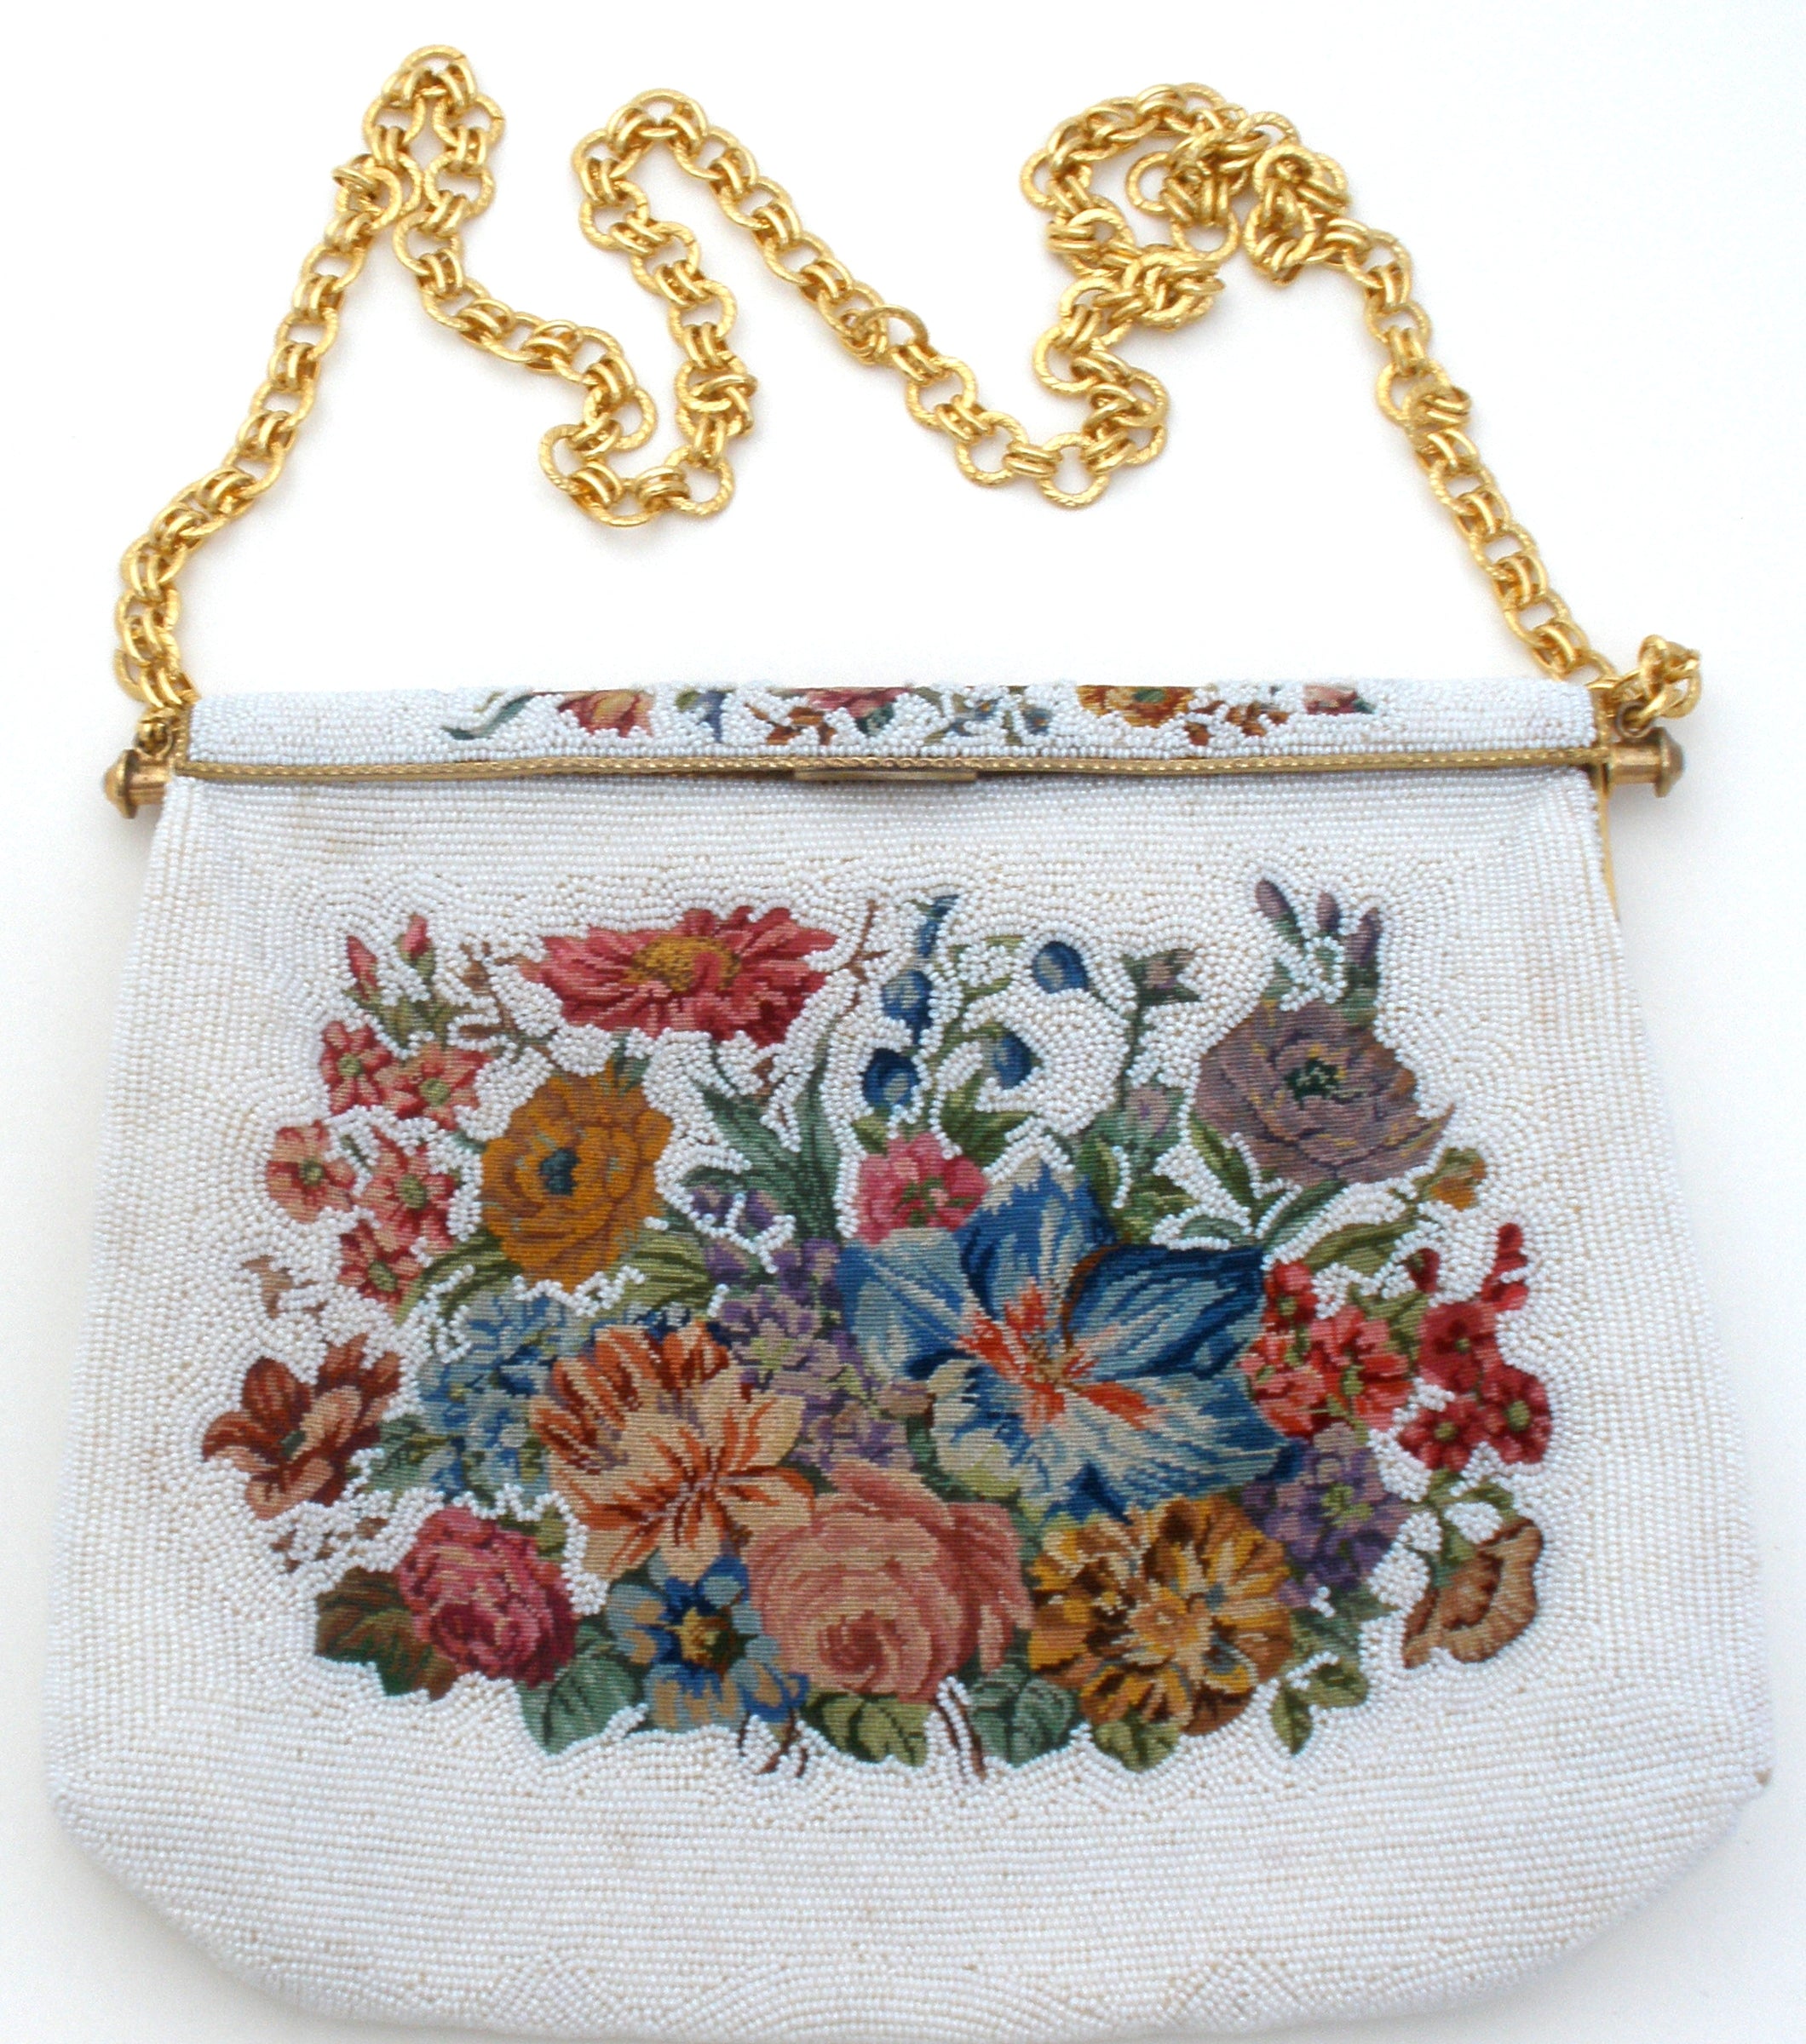 Vintage Beaded & Needlepoint Floral Purse France – The Jewelry Lady's Store